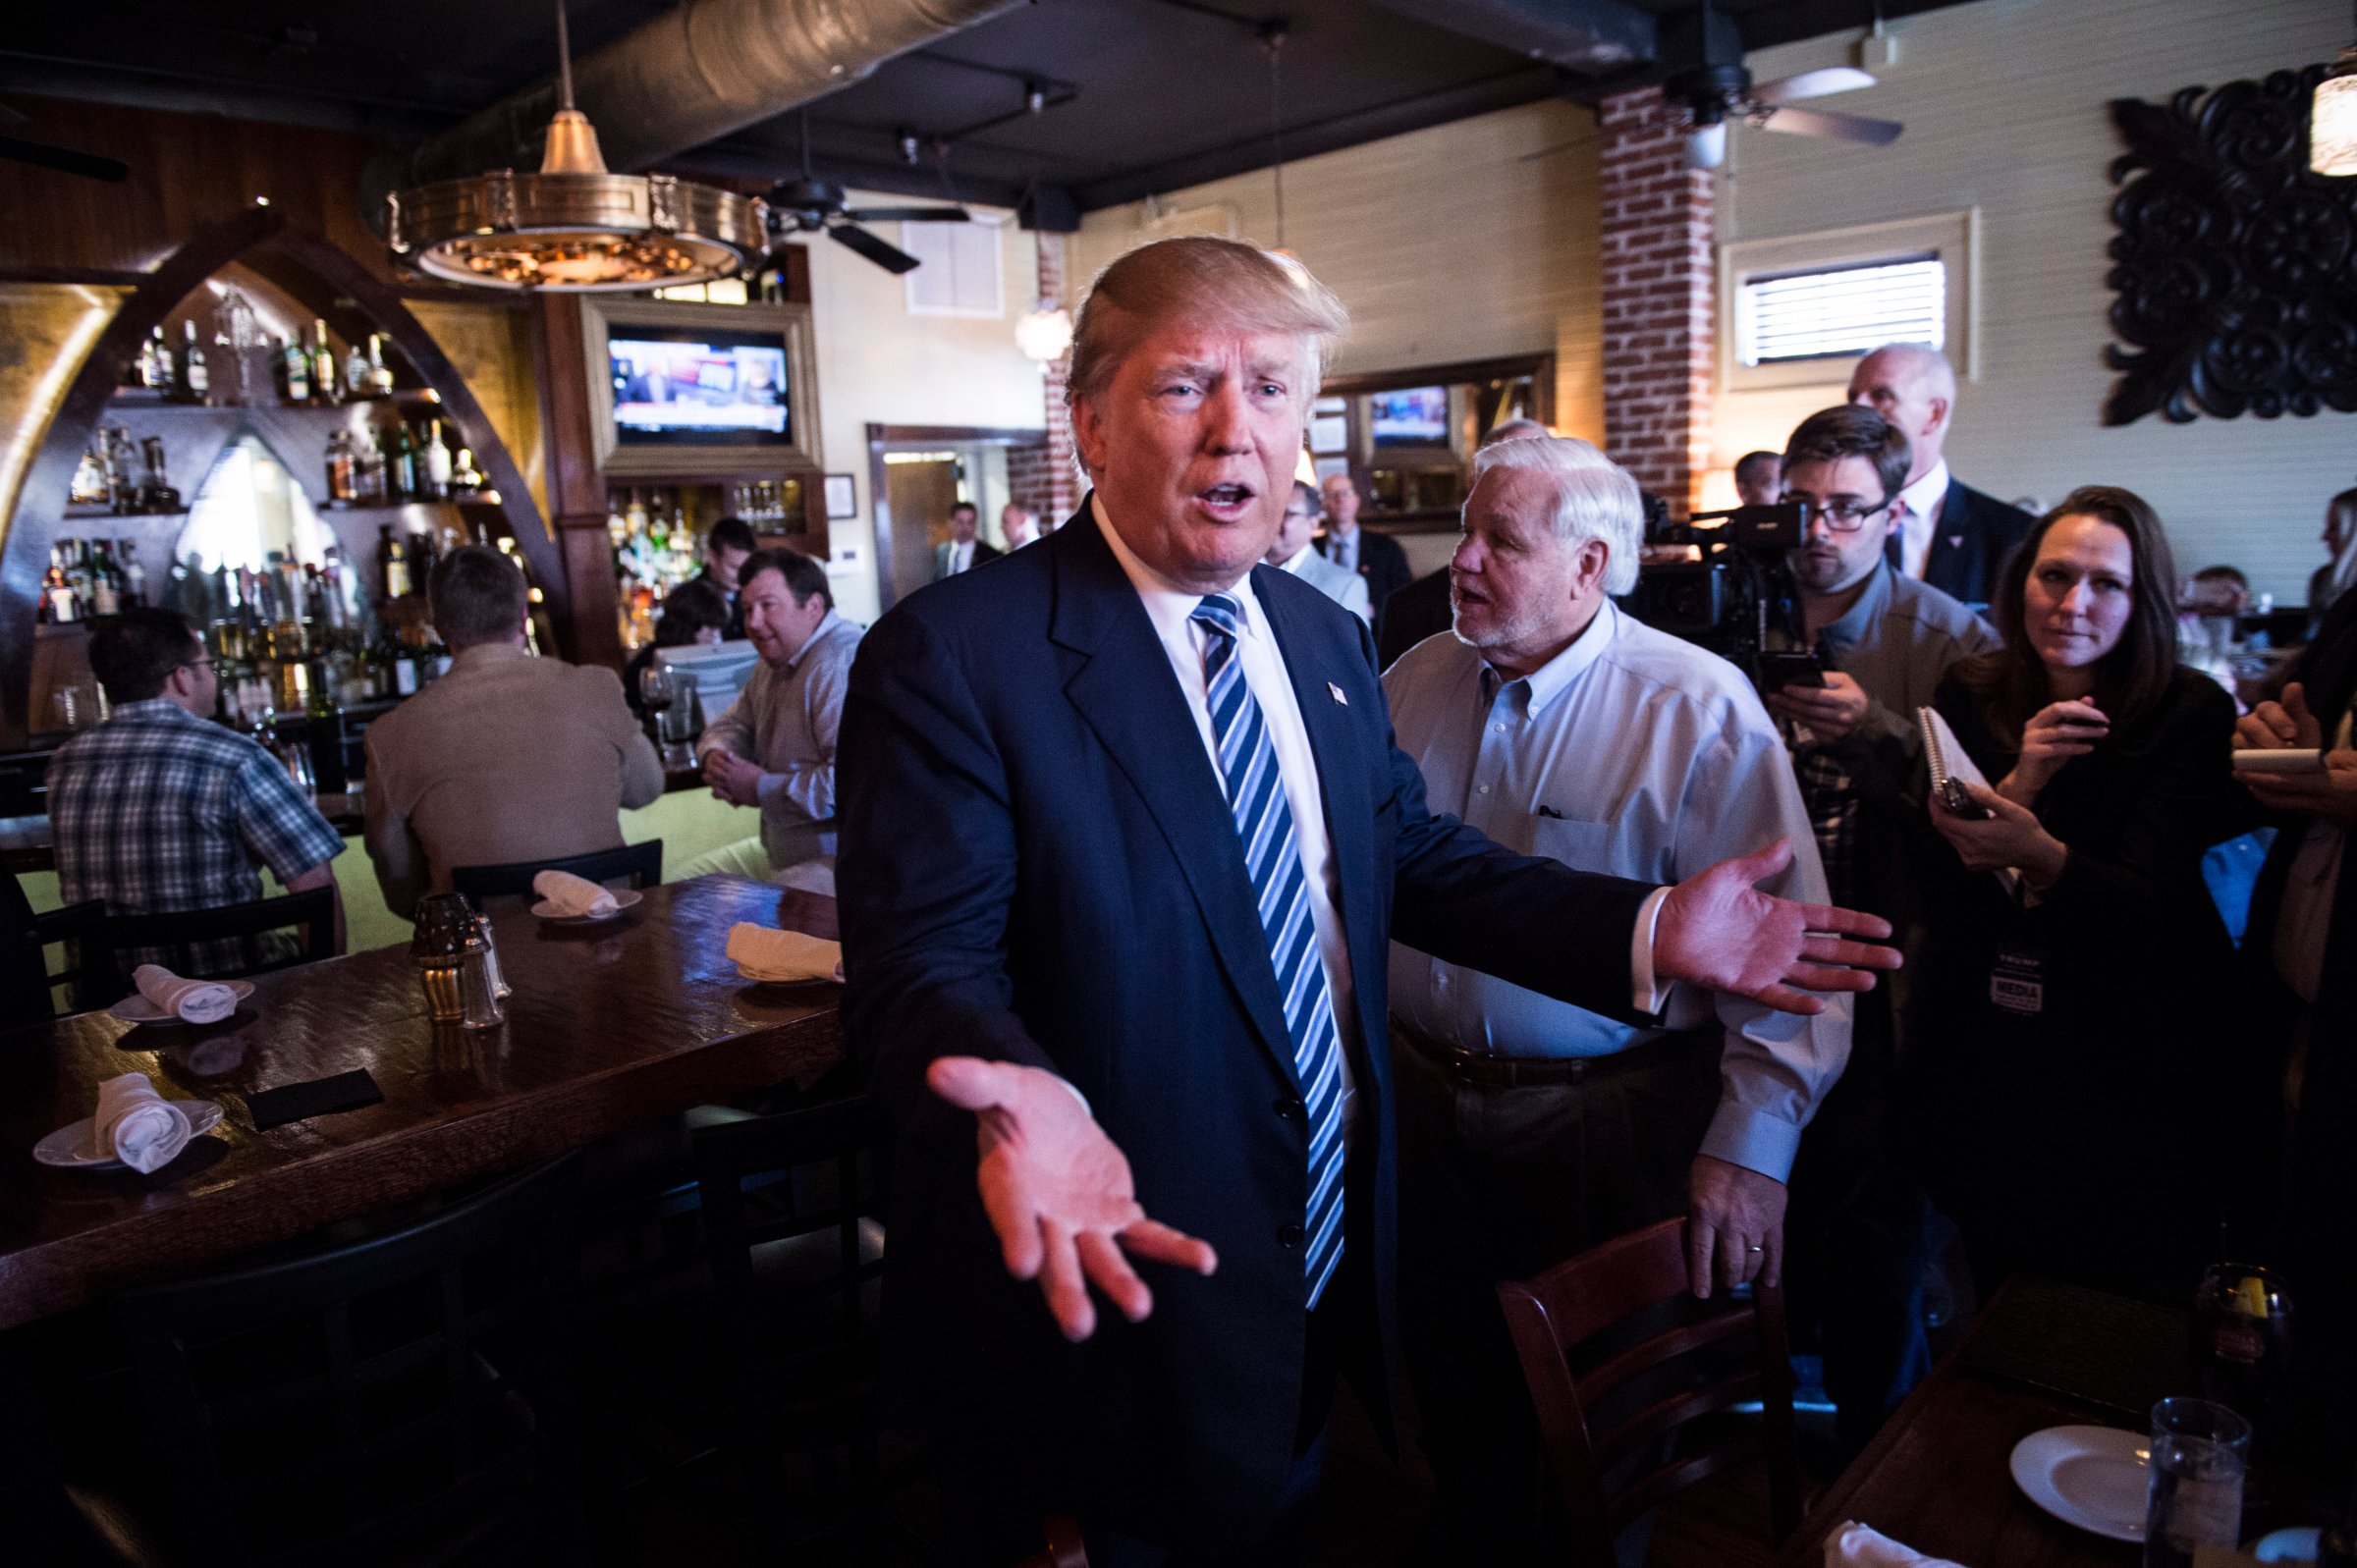 Republican presidential candidate Donald Trump greets people while making a stop for lunch between campaign events at Fratello's Italian Tavern in North Charleston, S.C. on Feb. 18, 2016.